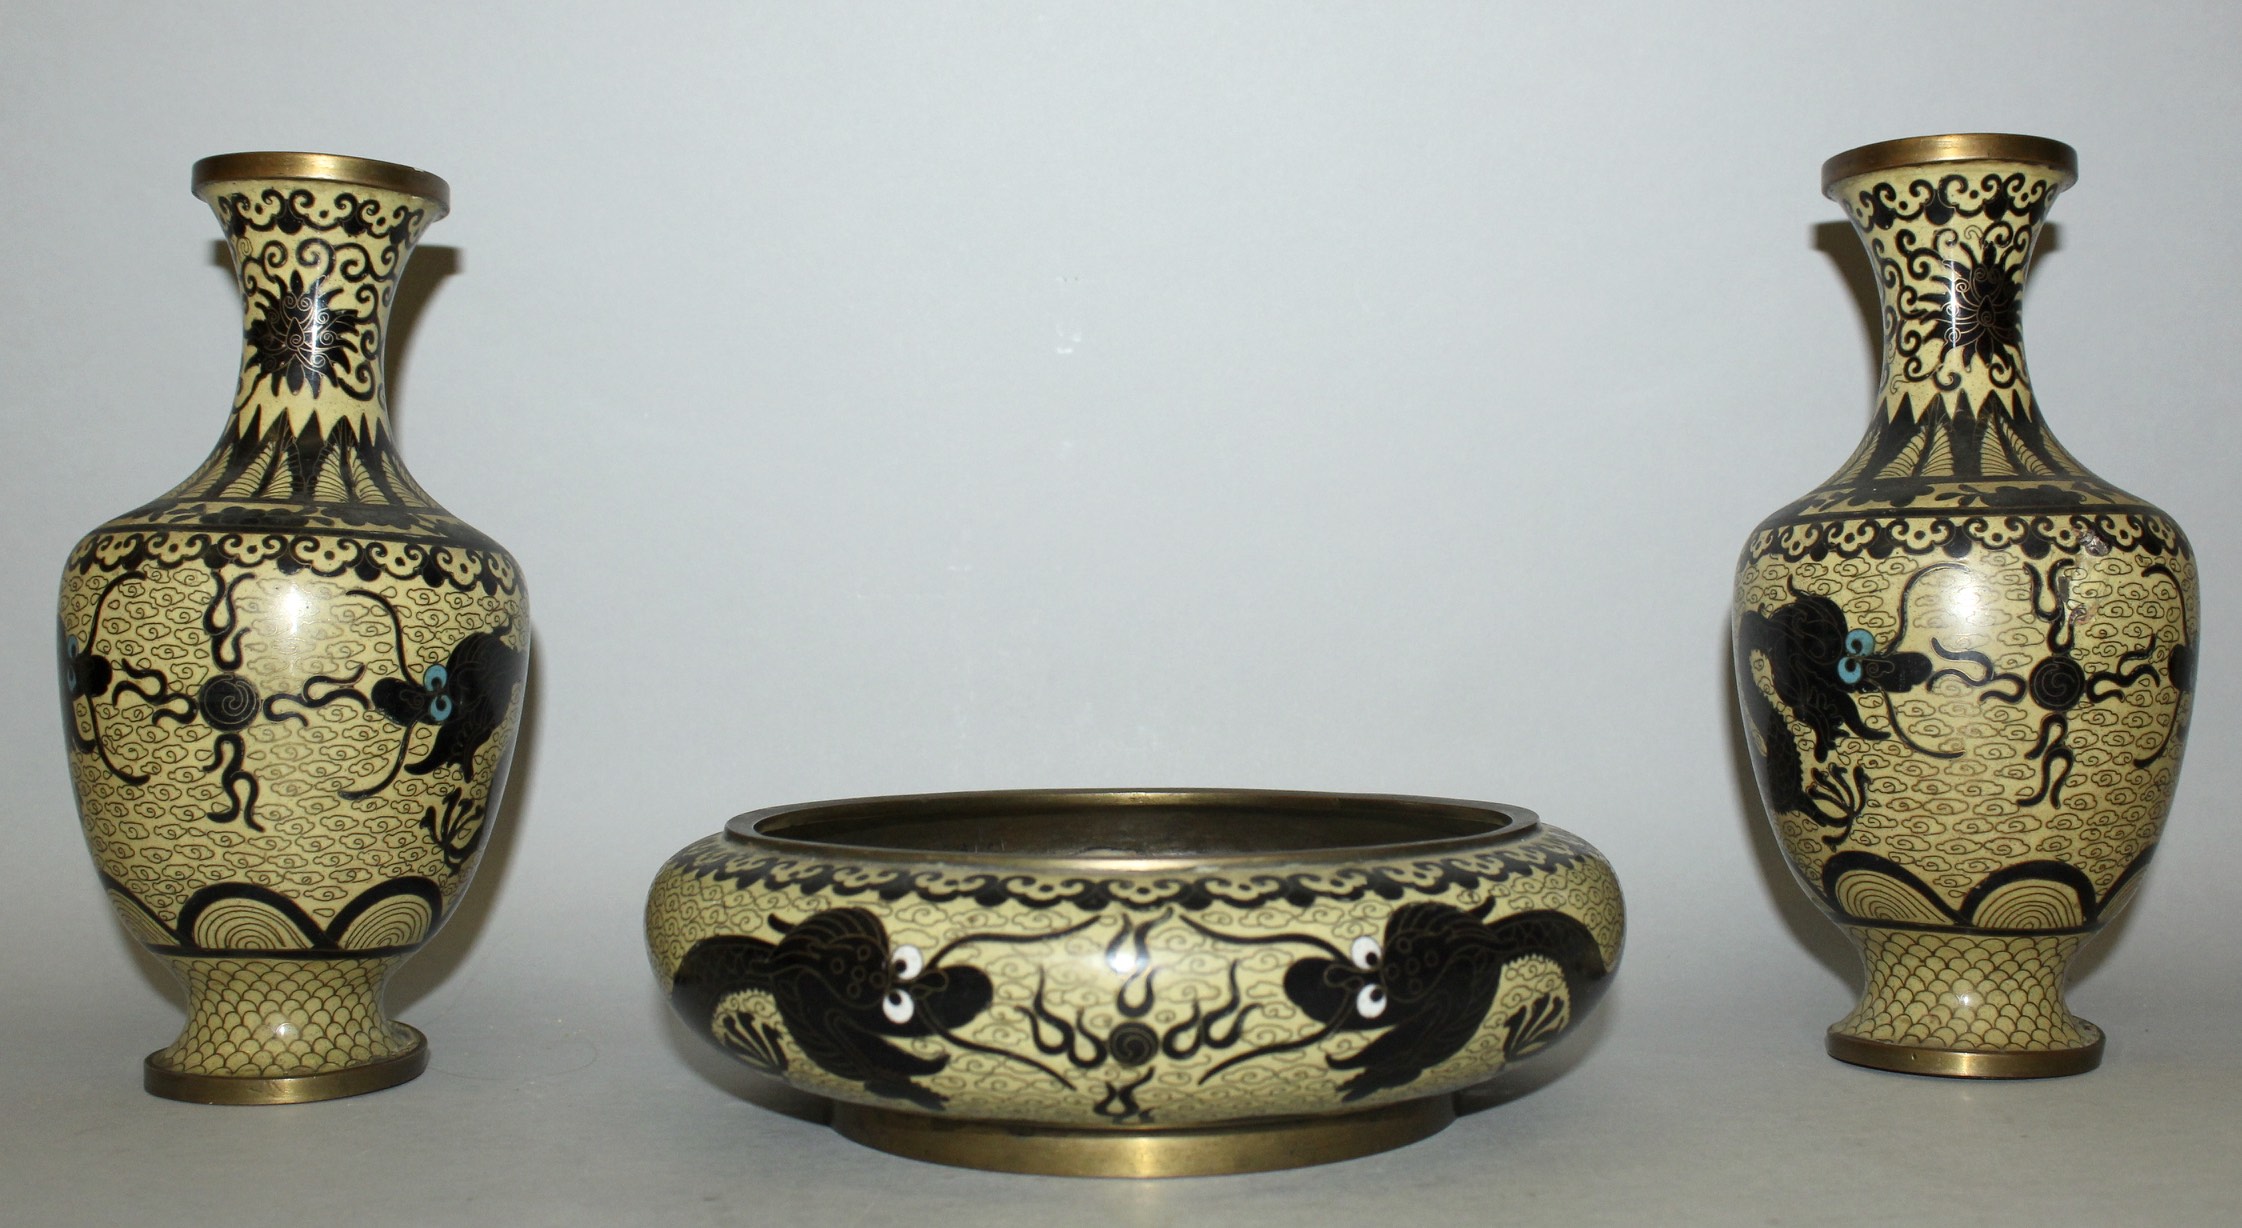 A PAIR OF EARLY 20TH CENTURY CHINESE YELLOW GROUND CLOISONNE VASES & A MATCHING BOWL, each piece